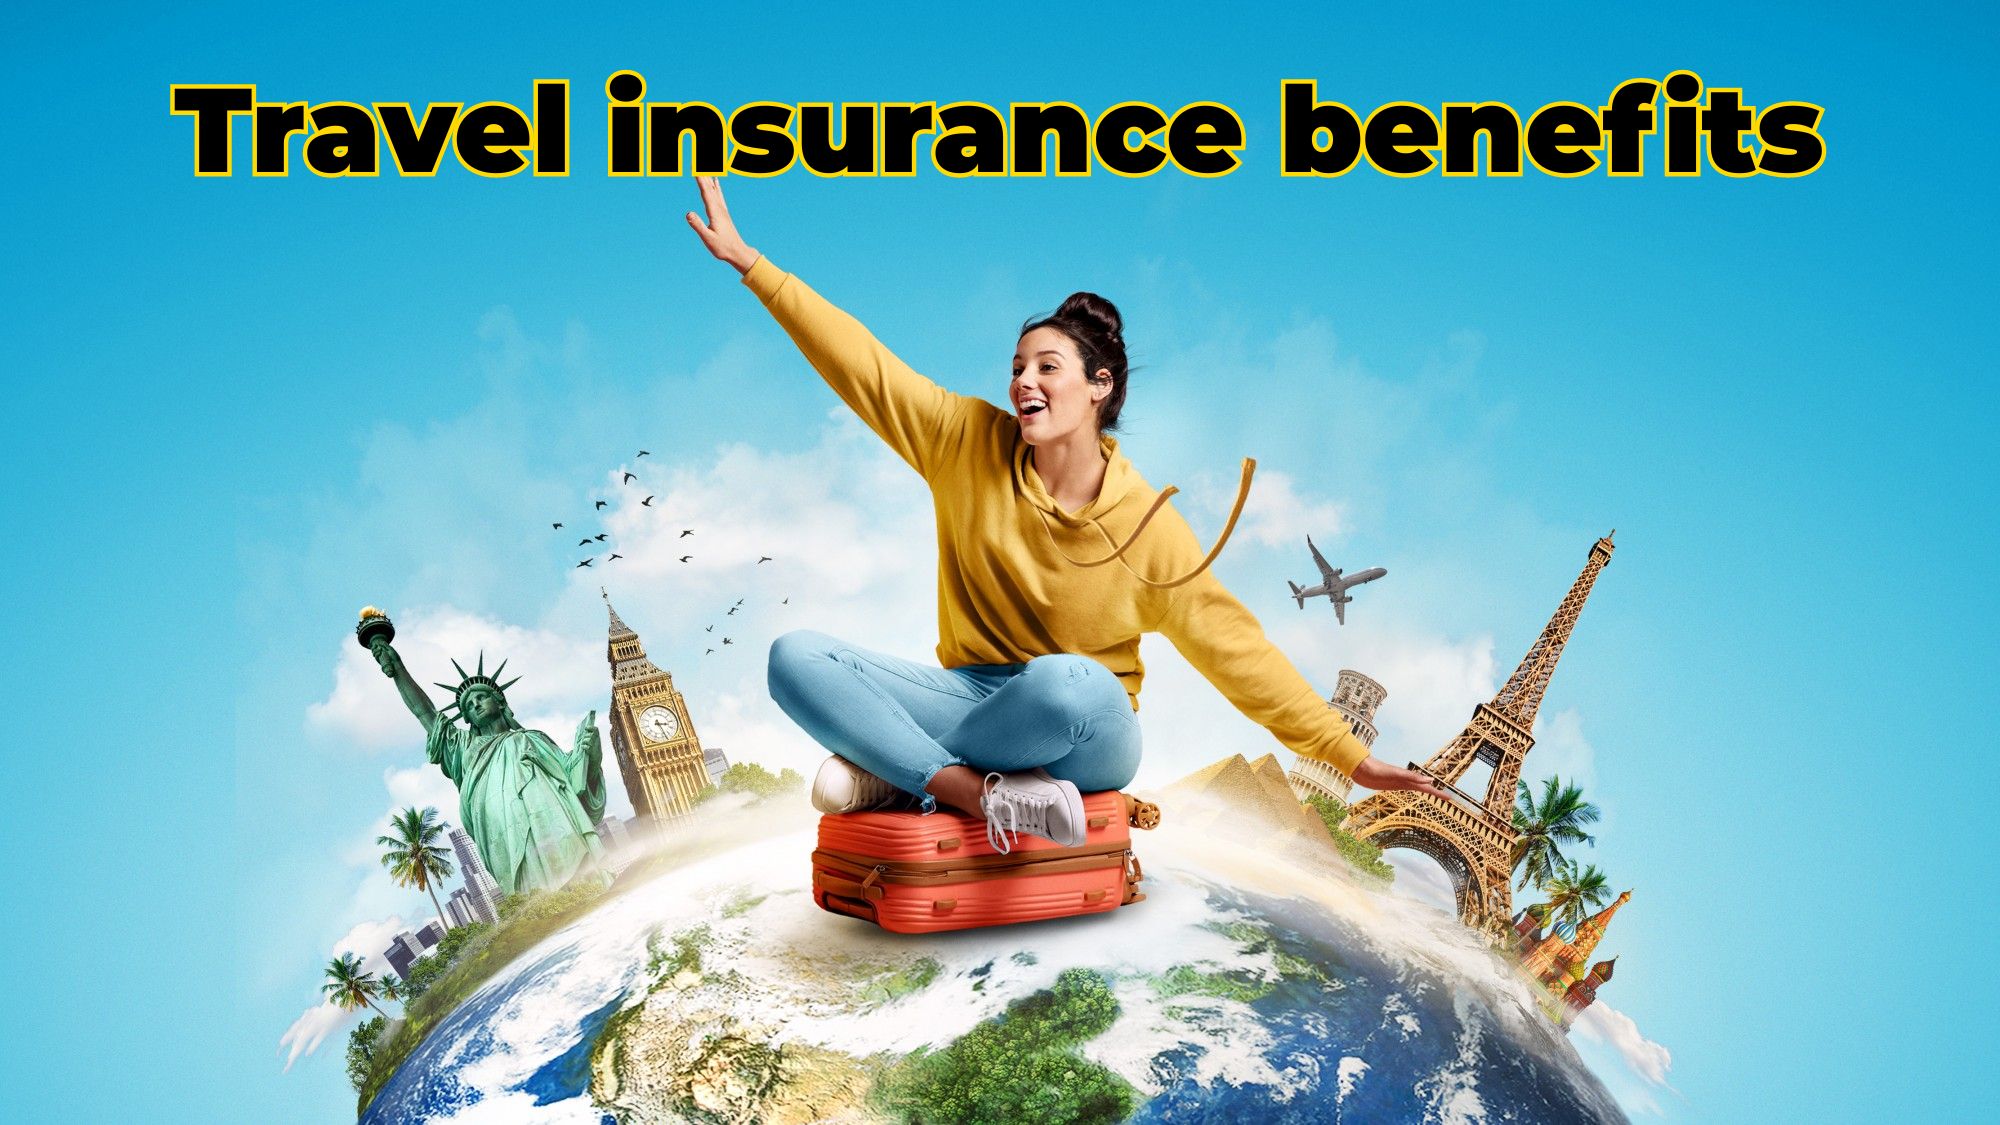 Know benefits of travel insurance: if you miss your connecting trip, you will be covered